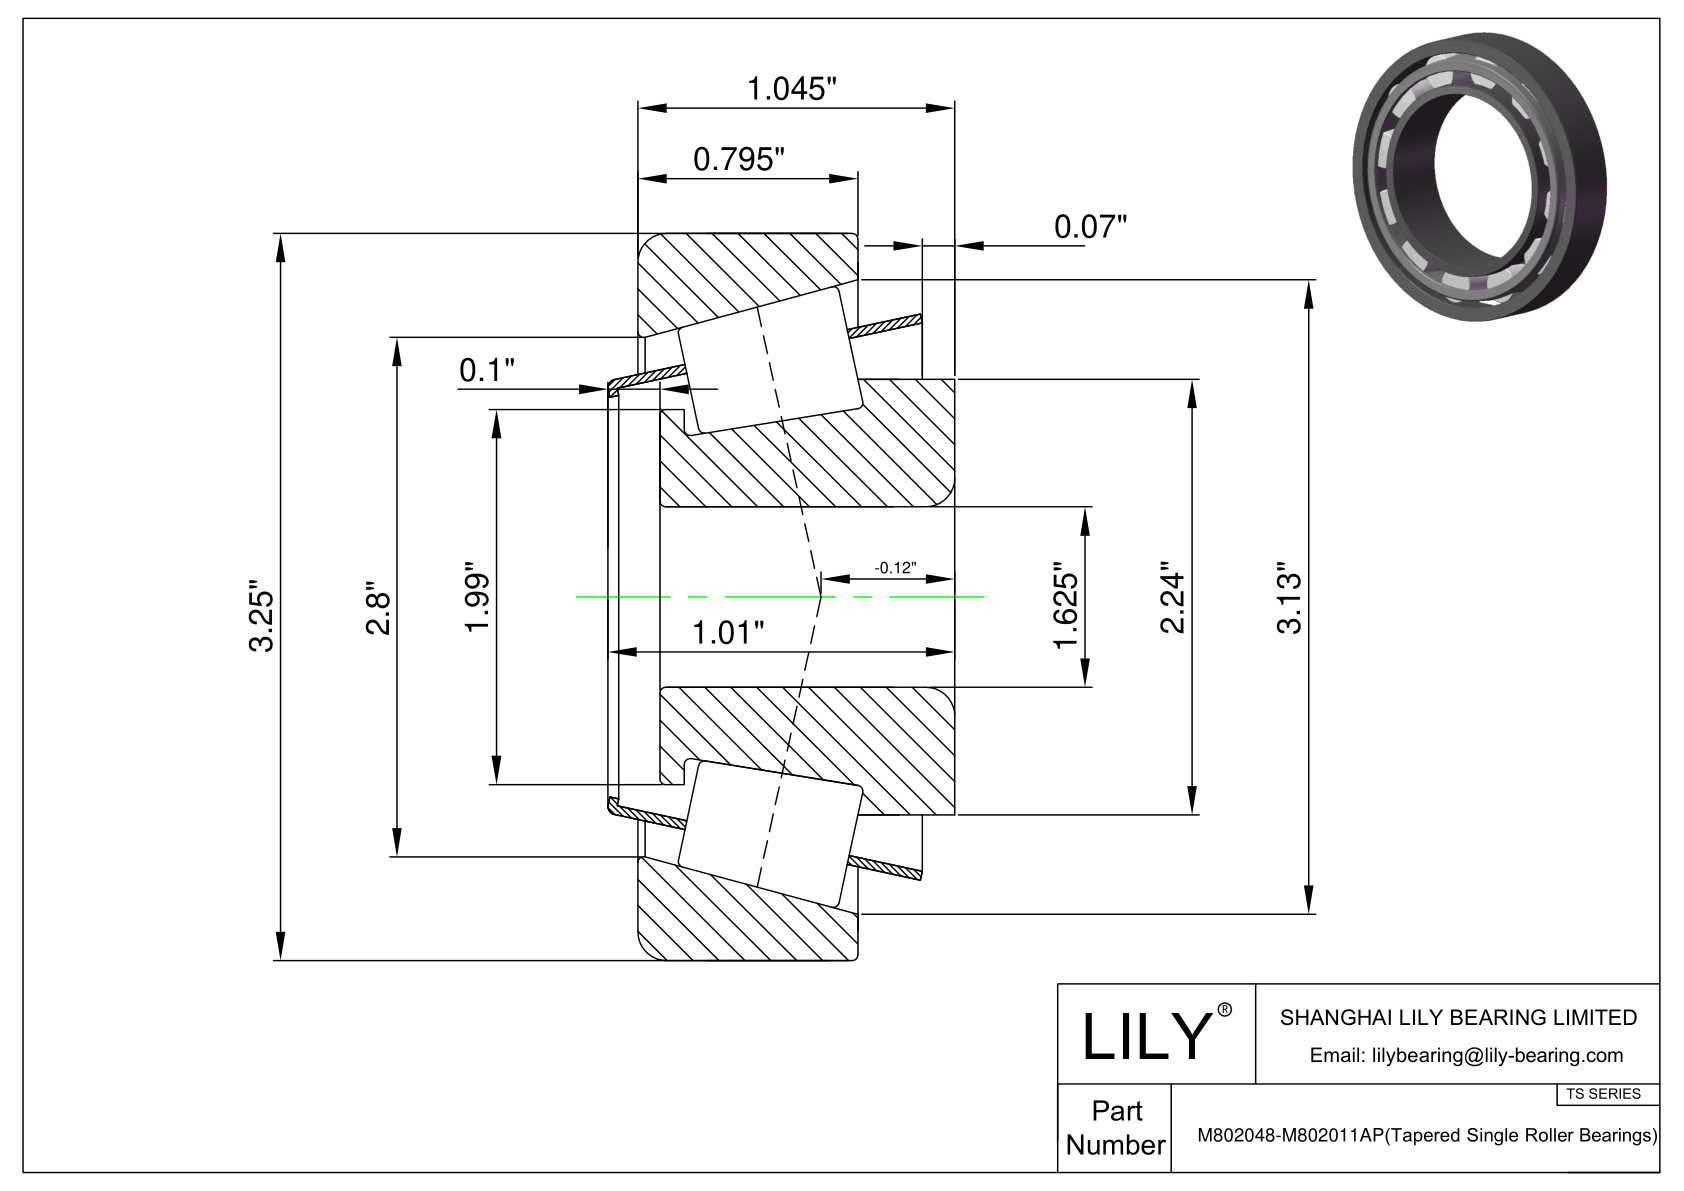 M802048-M802011AP TS (Tapered Single Roller Bearings) (Imperial) cad drawing